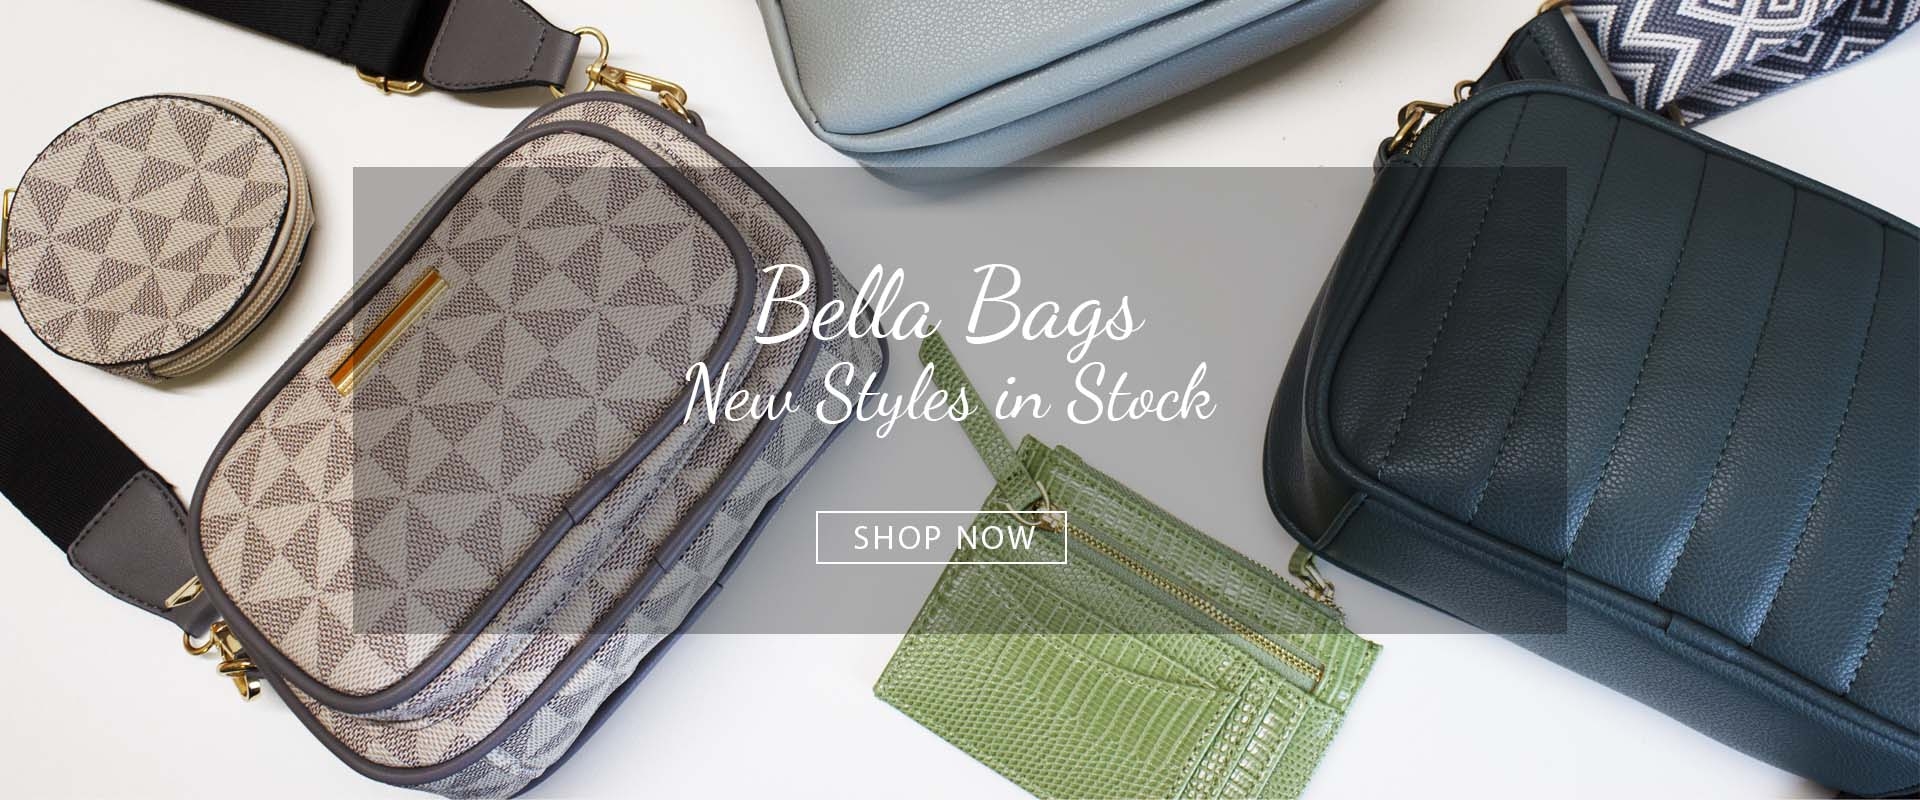 Welcome to Bella Bags